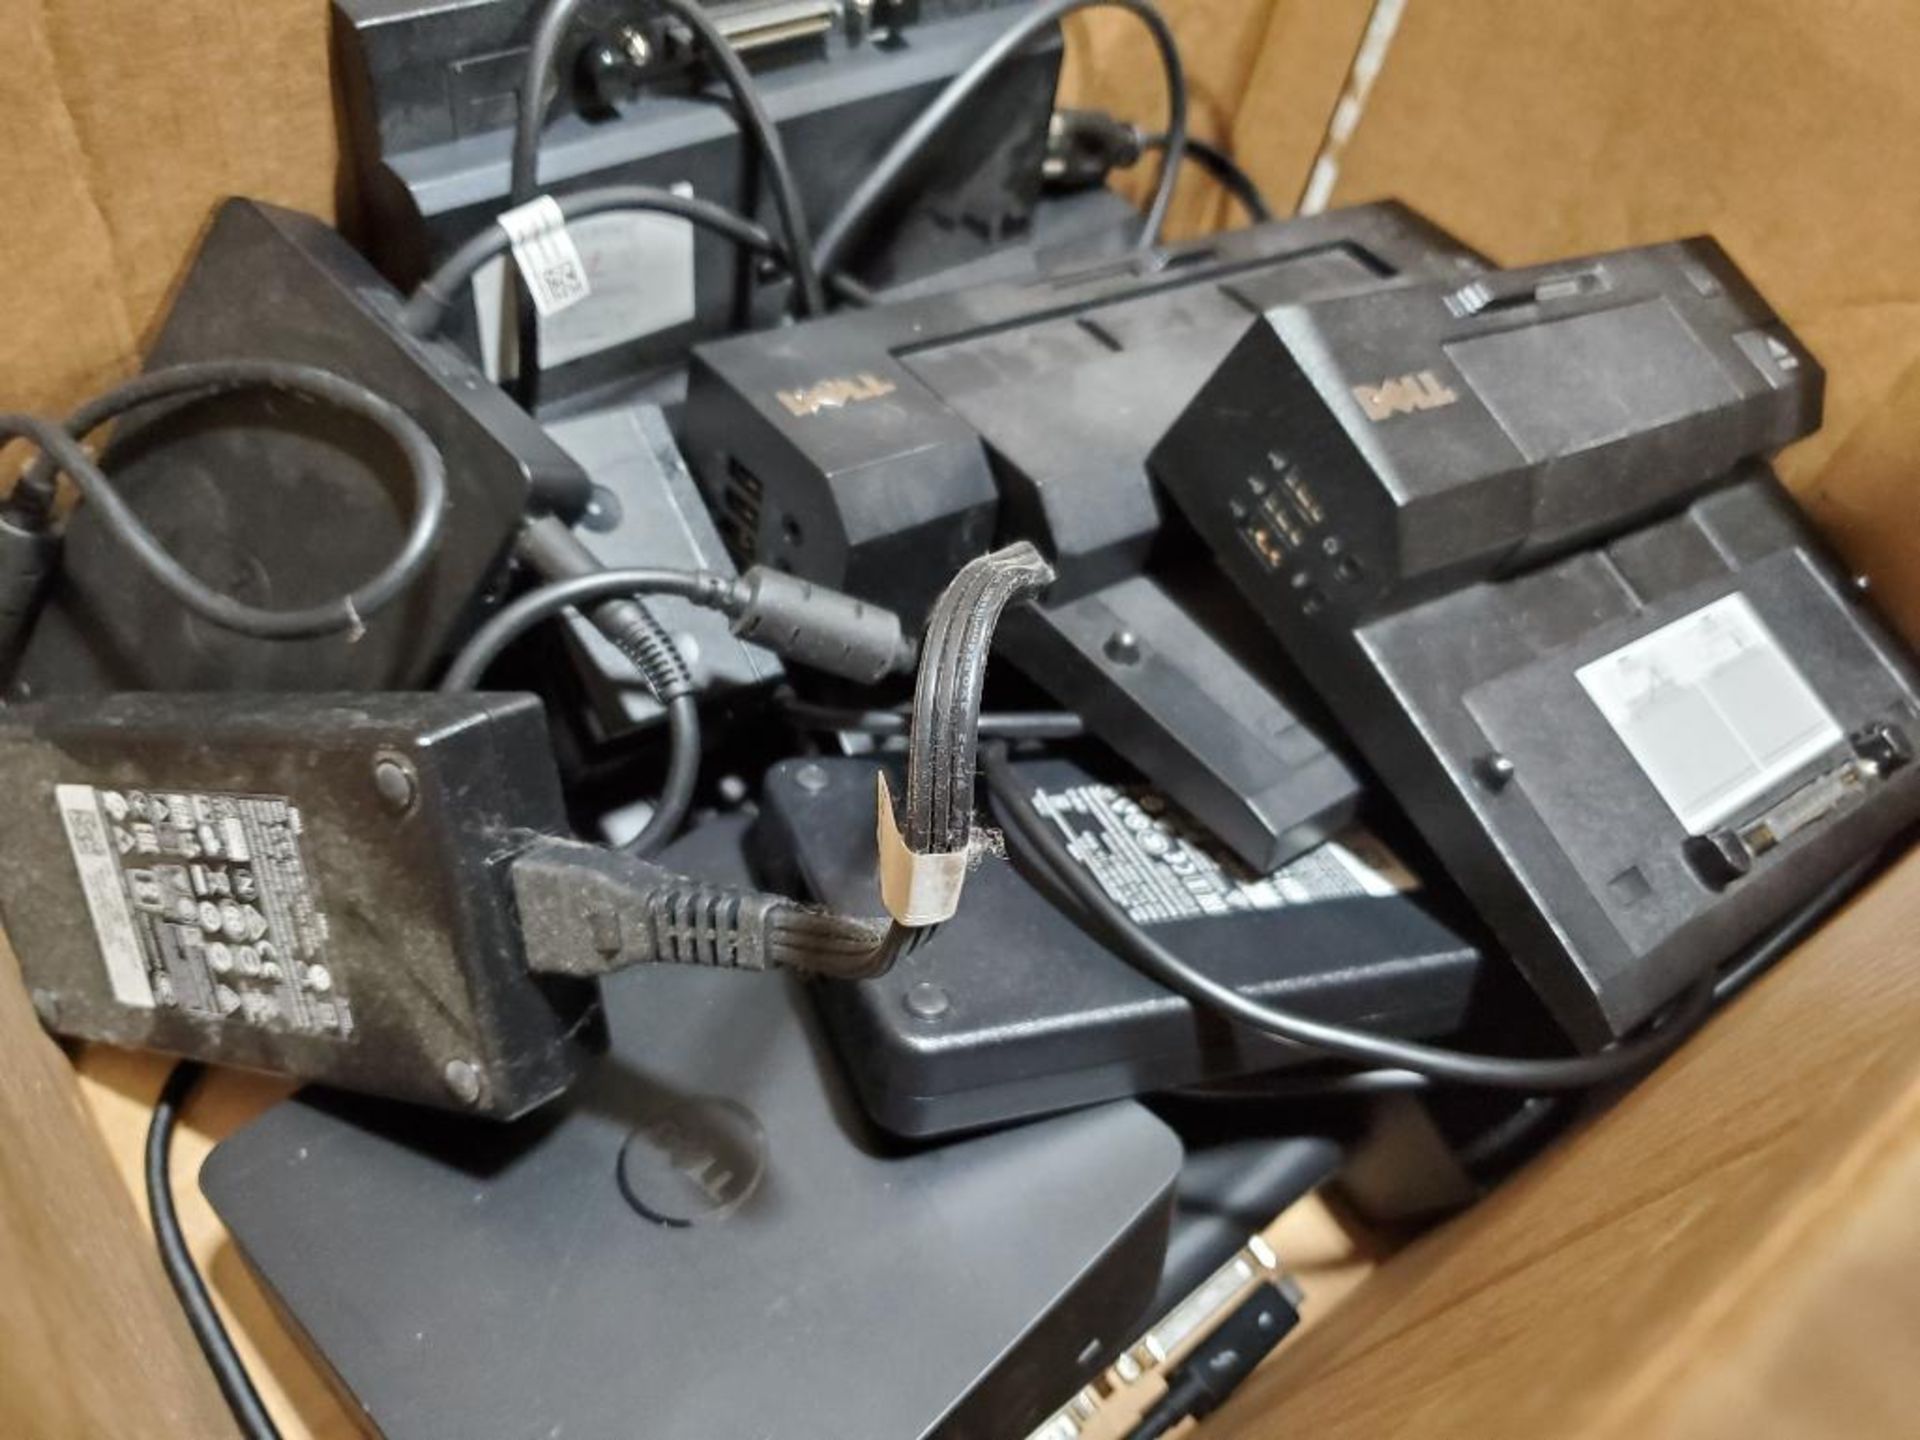 Assorted Dell docking stations and power supplies. - Image 3 of 7